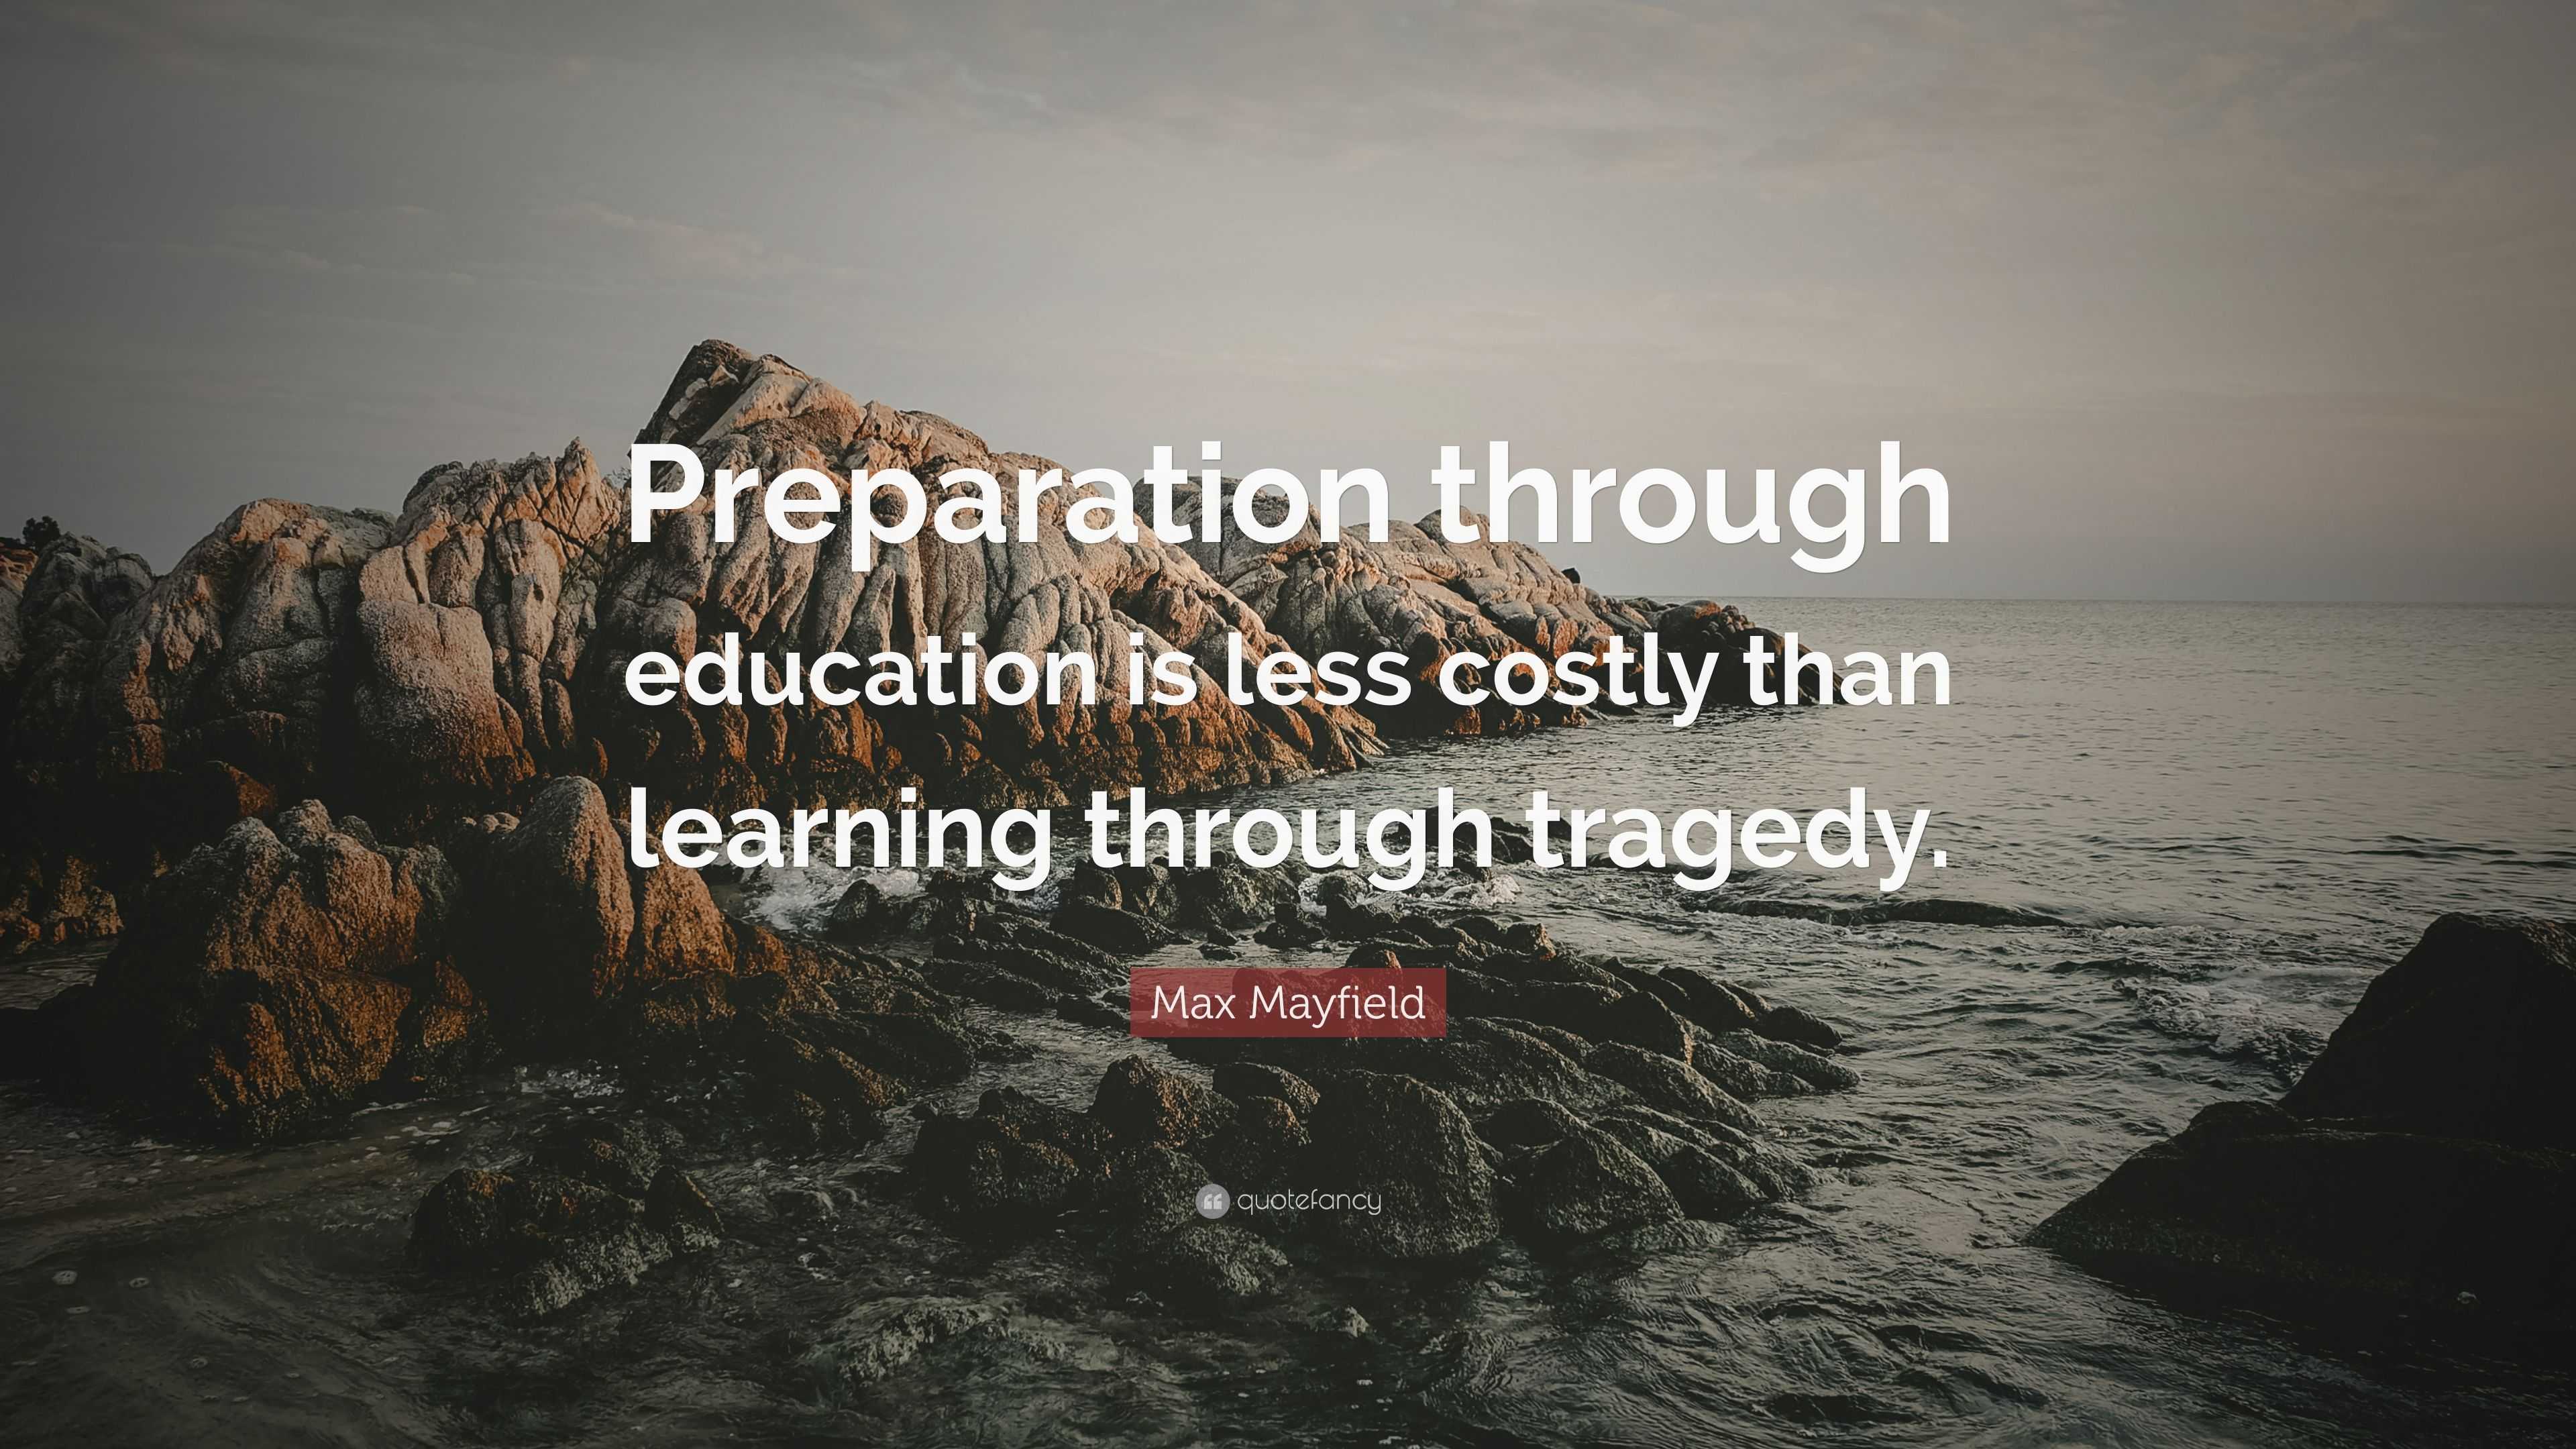 Max Mayfield Quote: “Preparation through education is less costly than ...